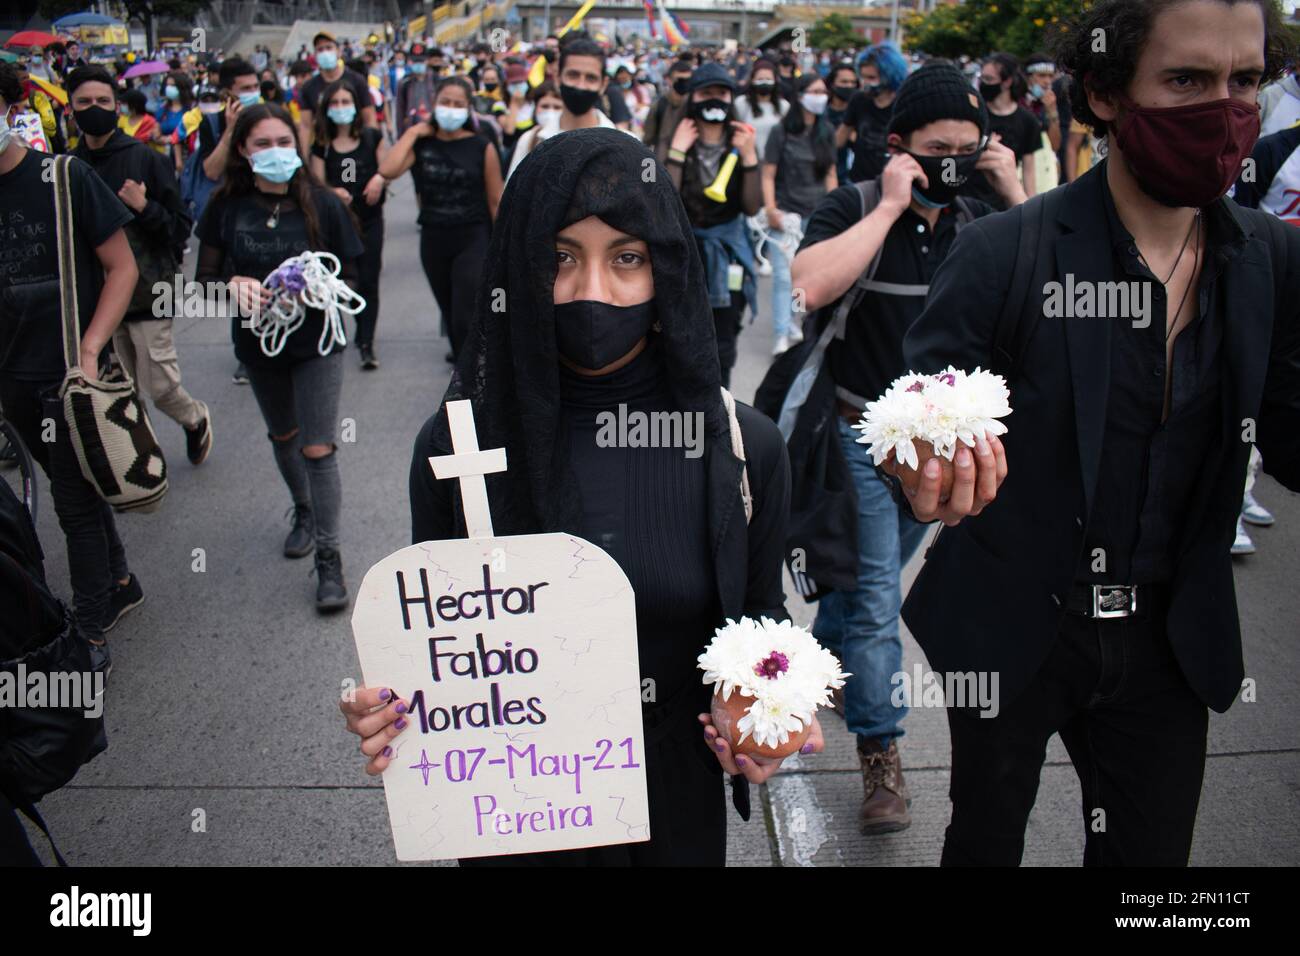 Bogota, Cundinamarca, Colombia. 12th May, 2021. The city of Bogota faces its fourteenth day of protests in the context of the national strike called by social sectors against the Colombian government of President Ivan Duque Credit: Daniel Romero/LongVisual/ZUMA Wire/Alamy Live News Stock Photo